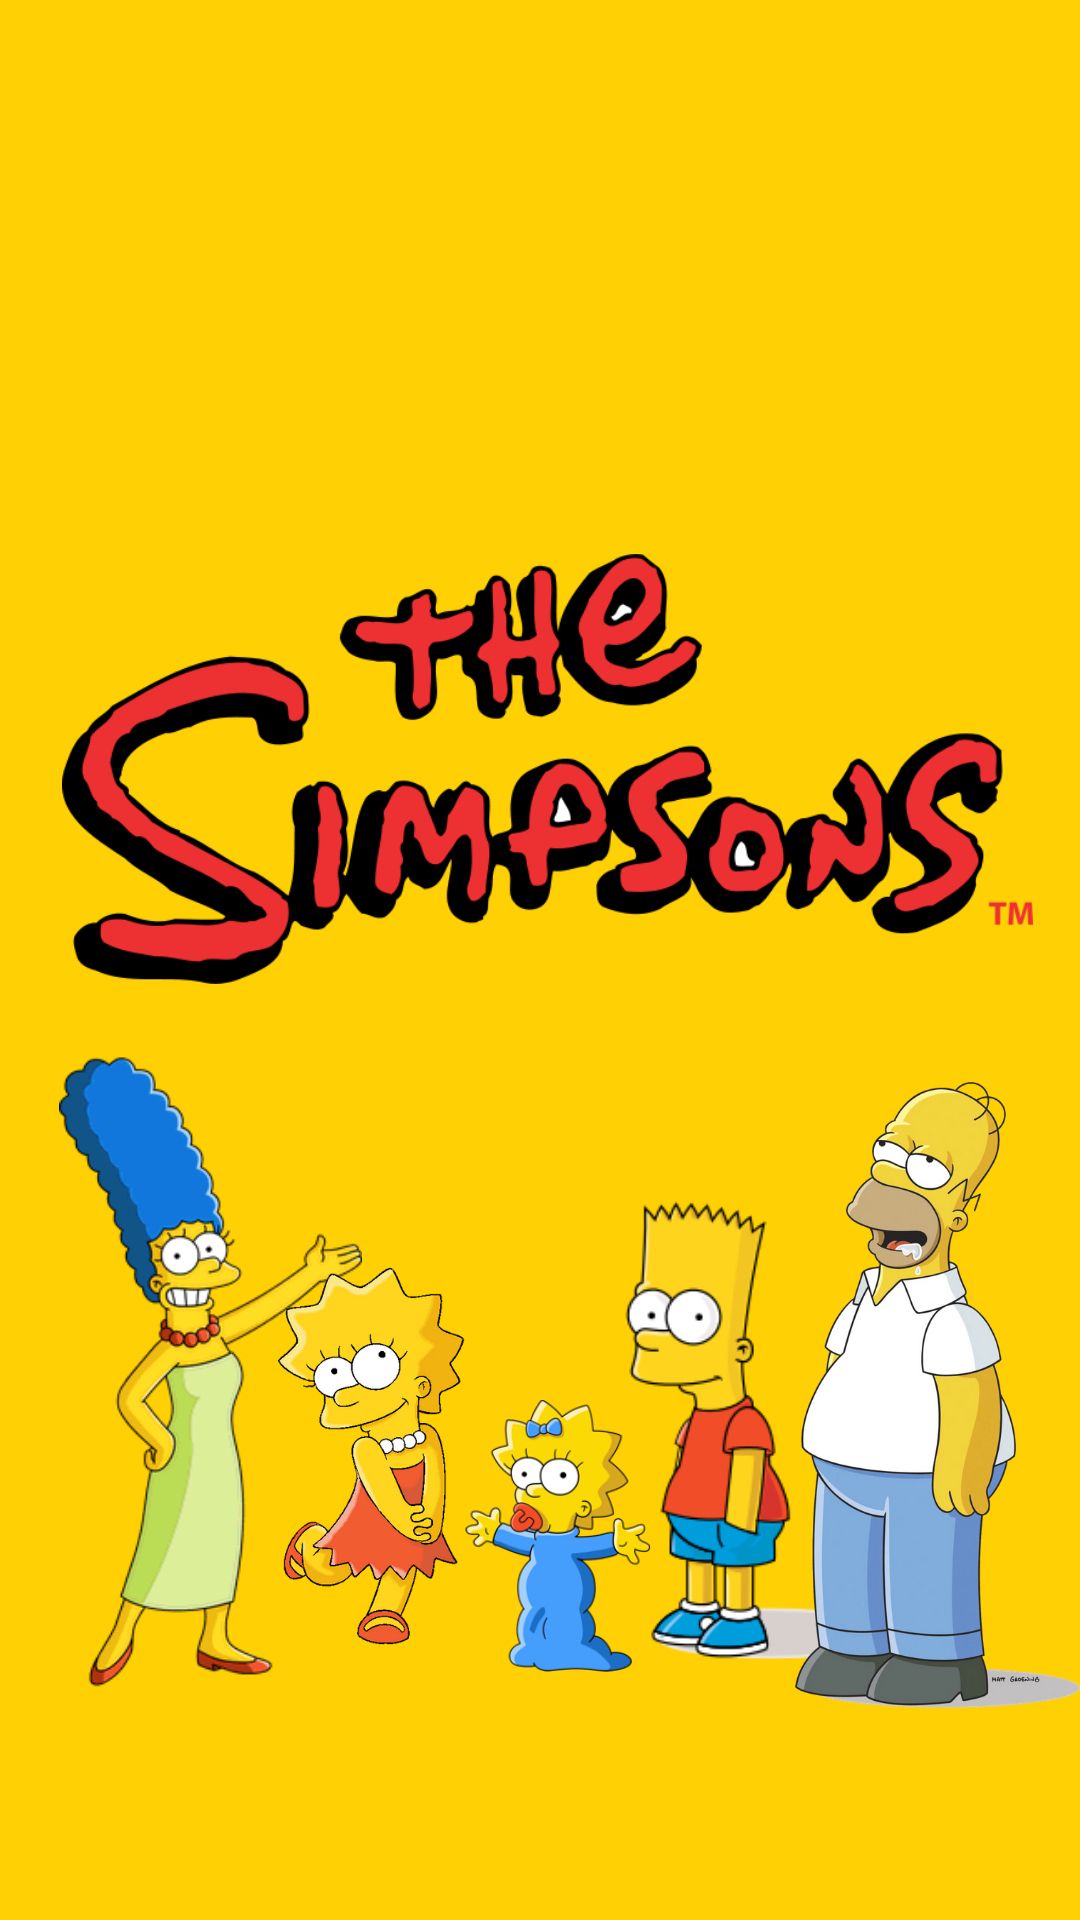 simpsons #yellow #bart #maggie #marge #homer #lisa #funny #tvshows